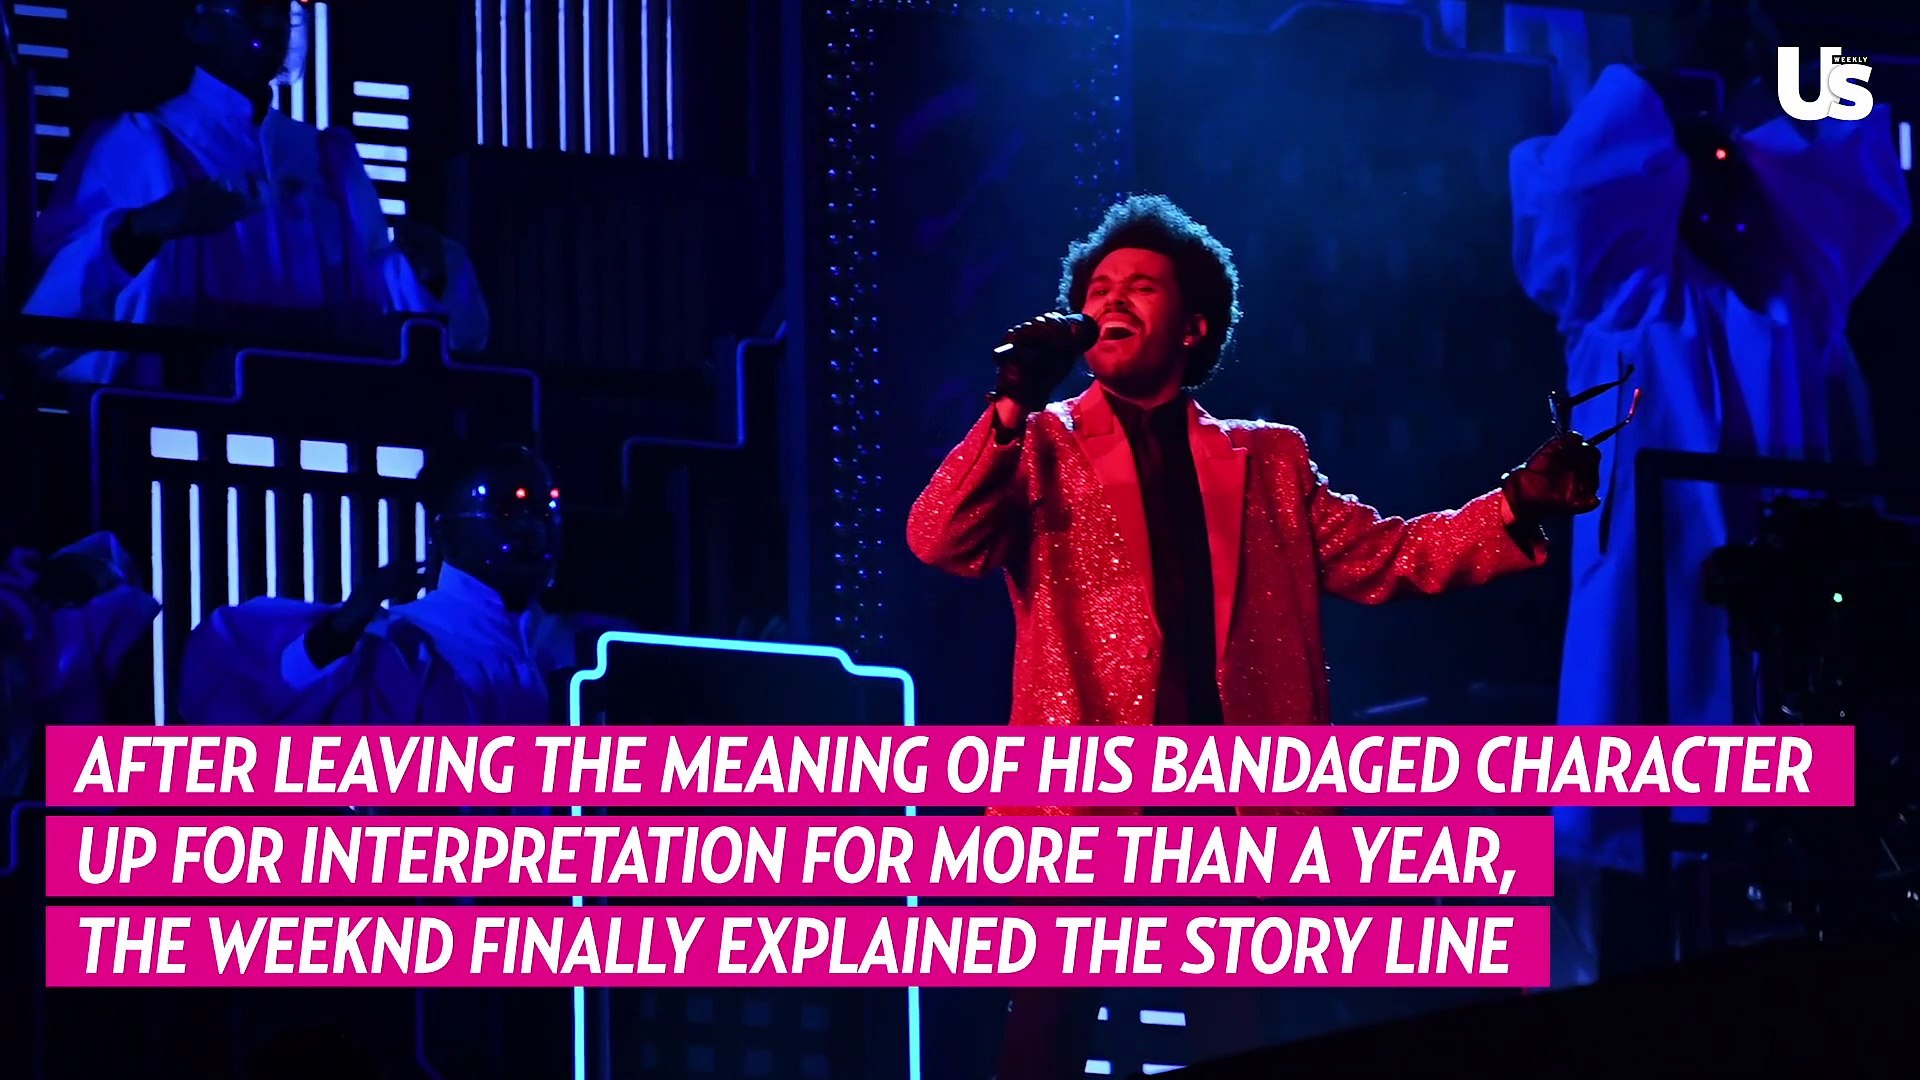 The Weeknd Explains the Meaning Behind His Bandaged Character